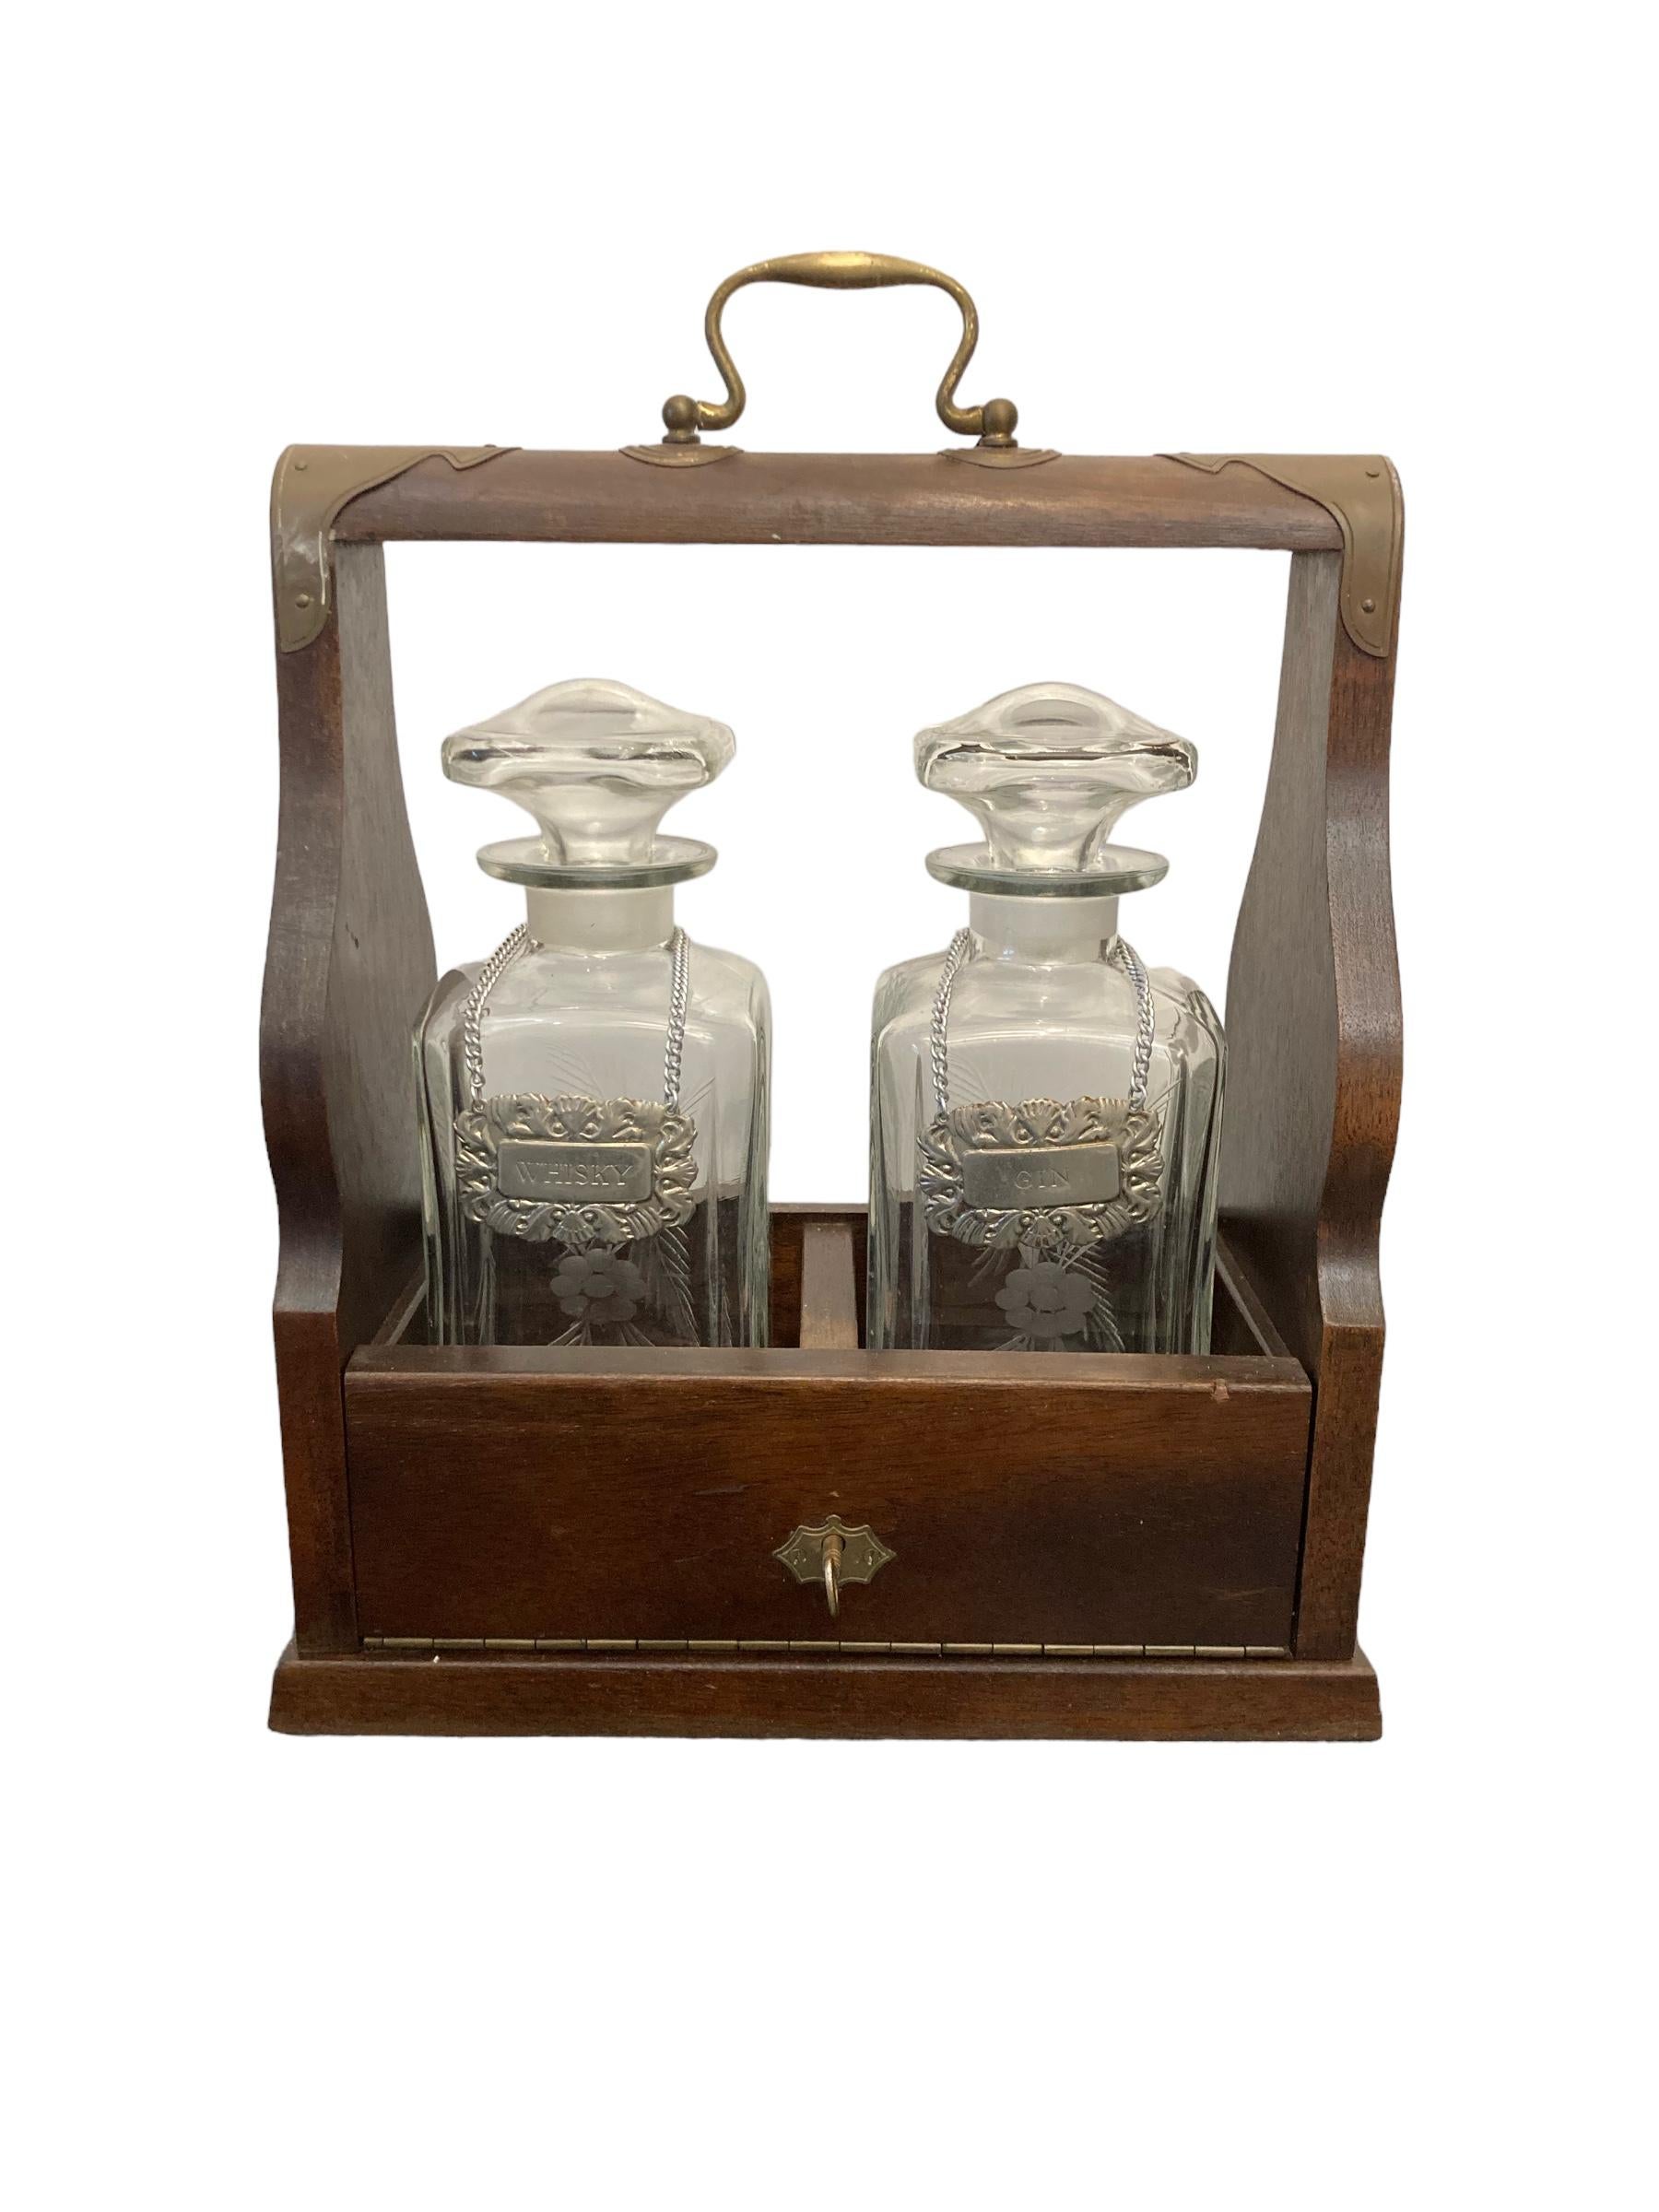 Victorian 2 Decanter Tantalus With Key Brass Hand Mahogany case silver plated Whiskey and Gin labels on chain. Bon état.
H : 32cm L : 27 cm P : 14cm